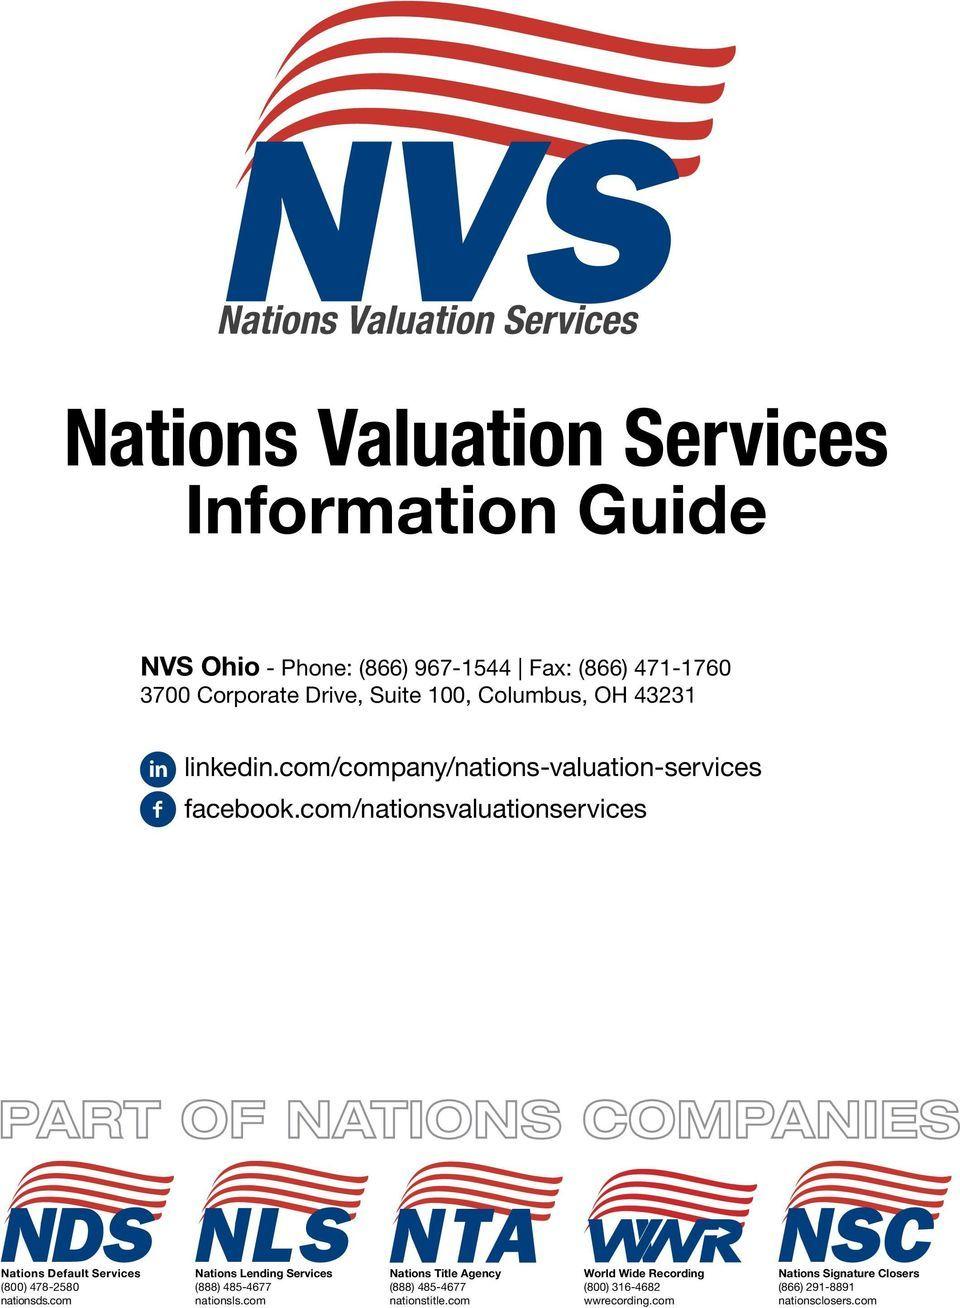 Nations Lending Logo - Nations Valuation Services - PDF